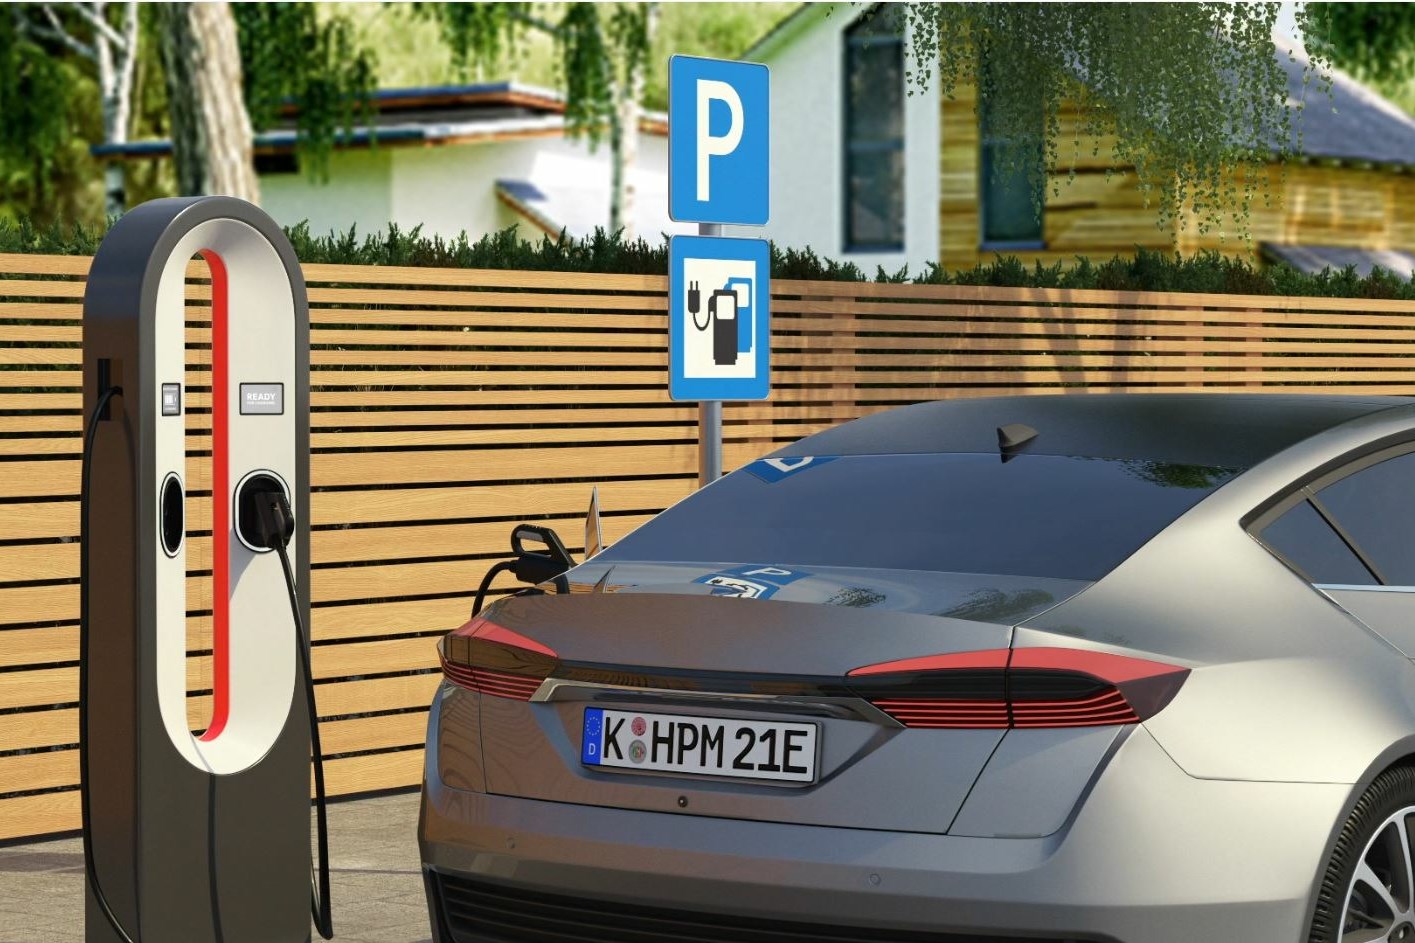 E-car charging at a charging station with HPM license plate